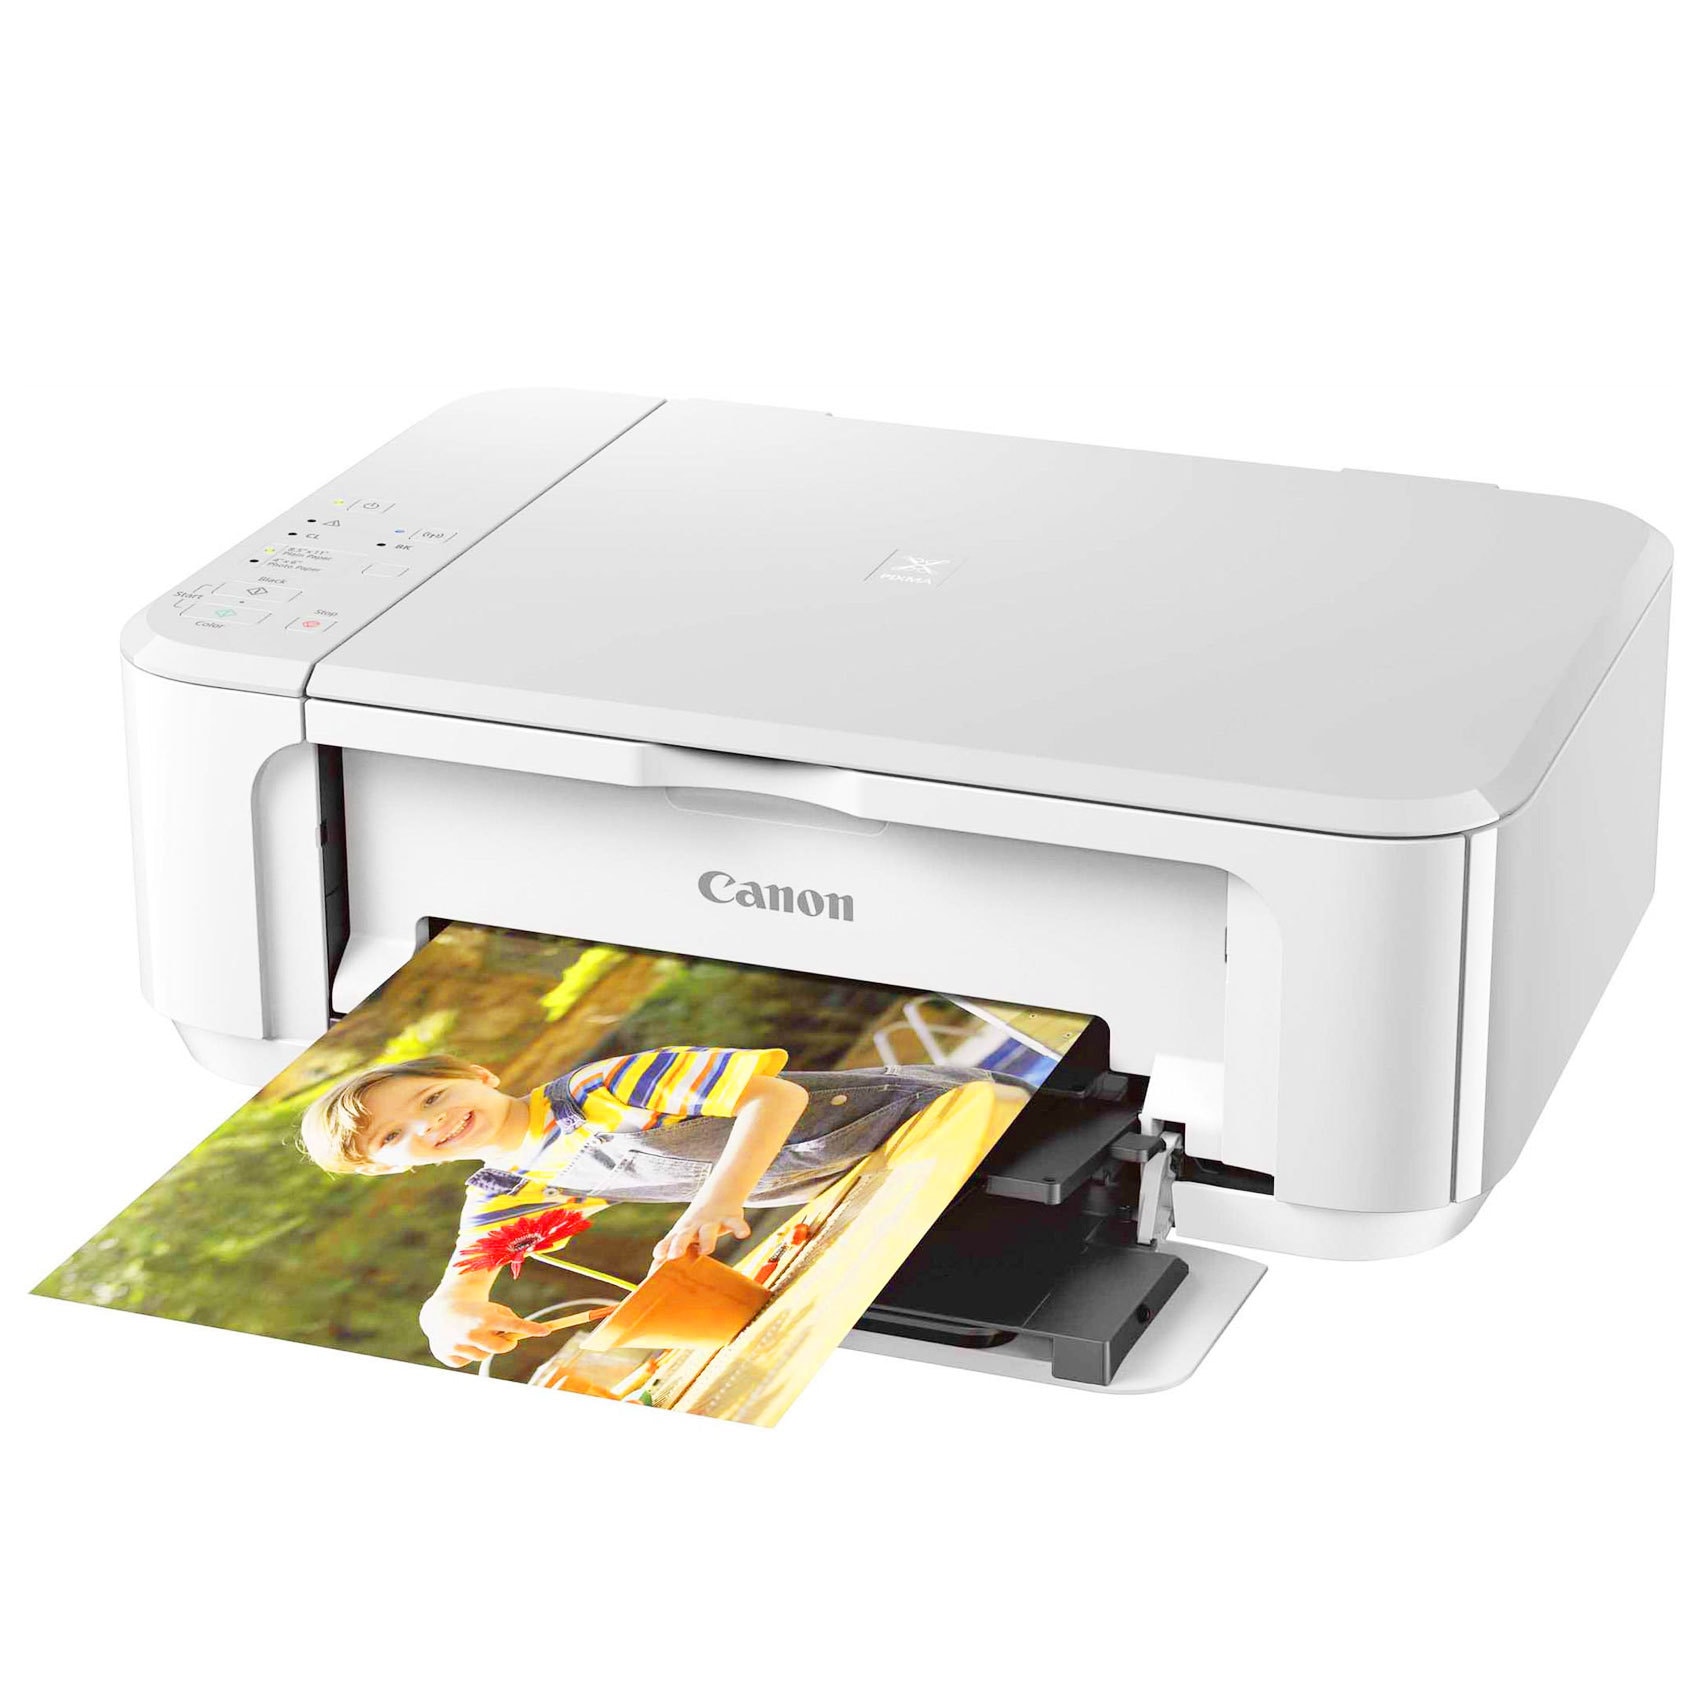 Buy Canon All In One Printer Pixma Mg3640 White Online Shop Electronics Appliances On Carrefour Uae